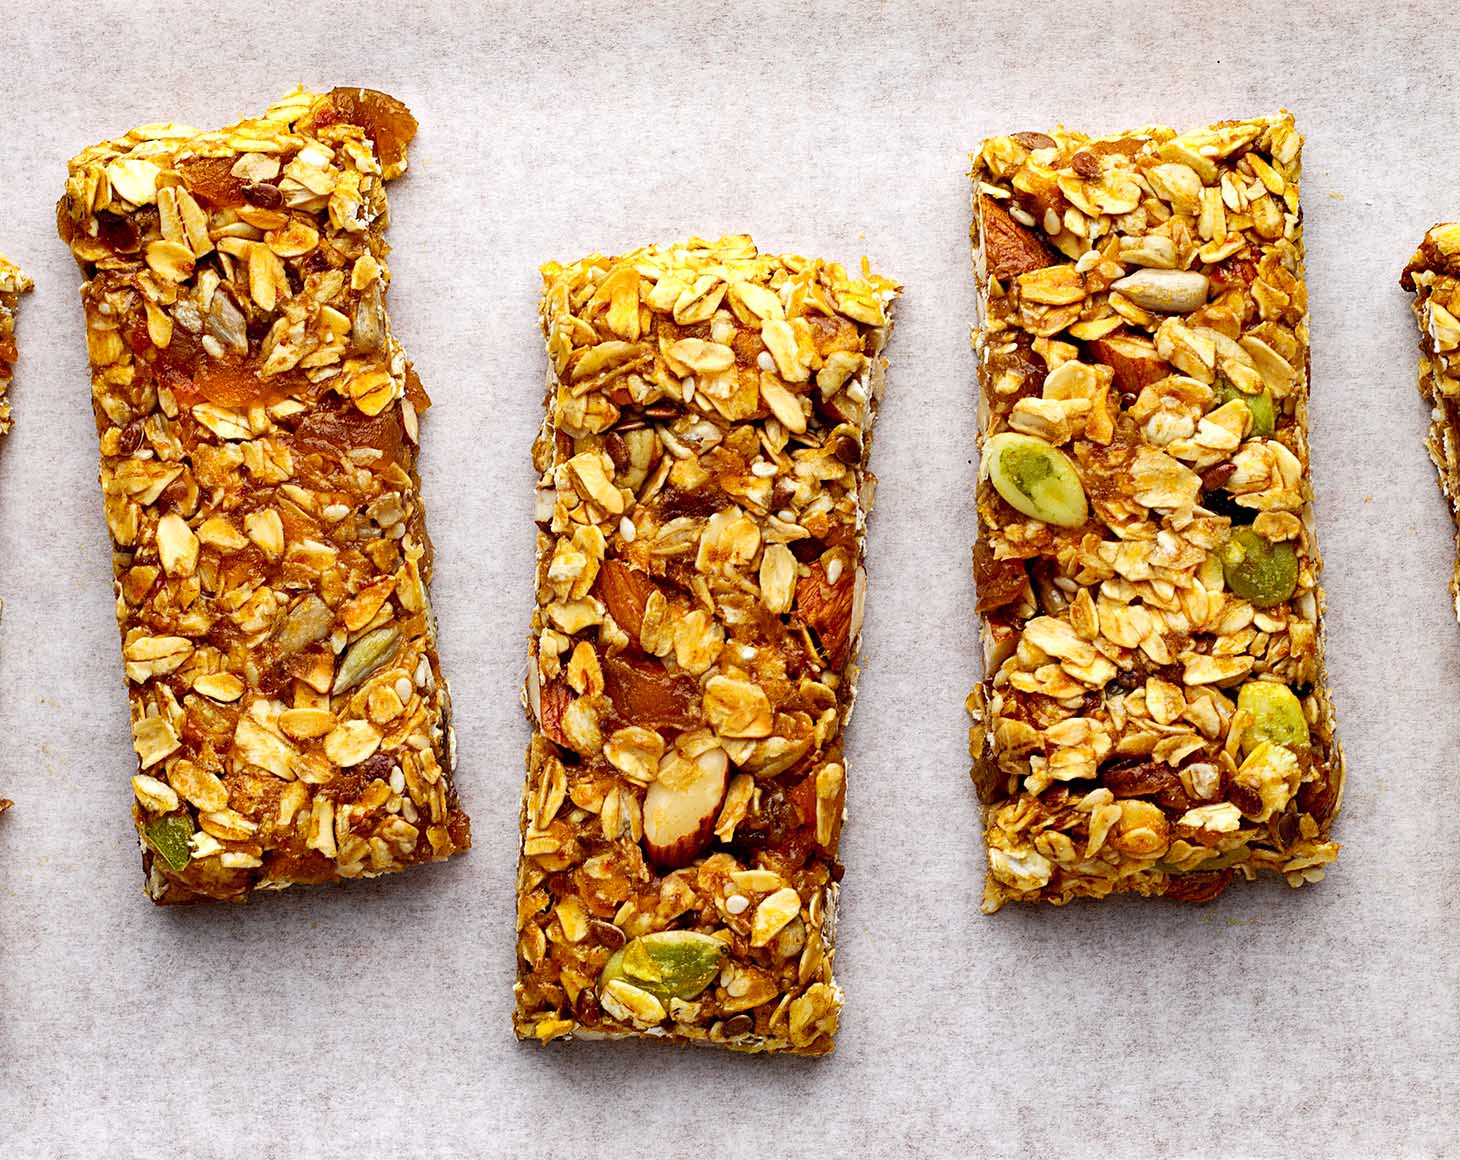 homemade-granola-bars-with-organic-dried-apricots